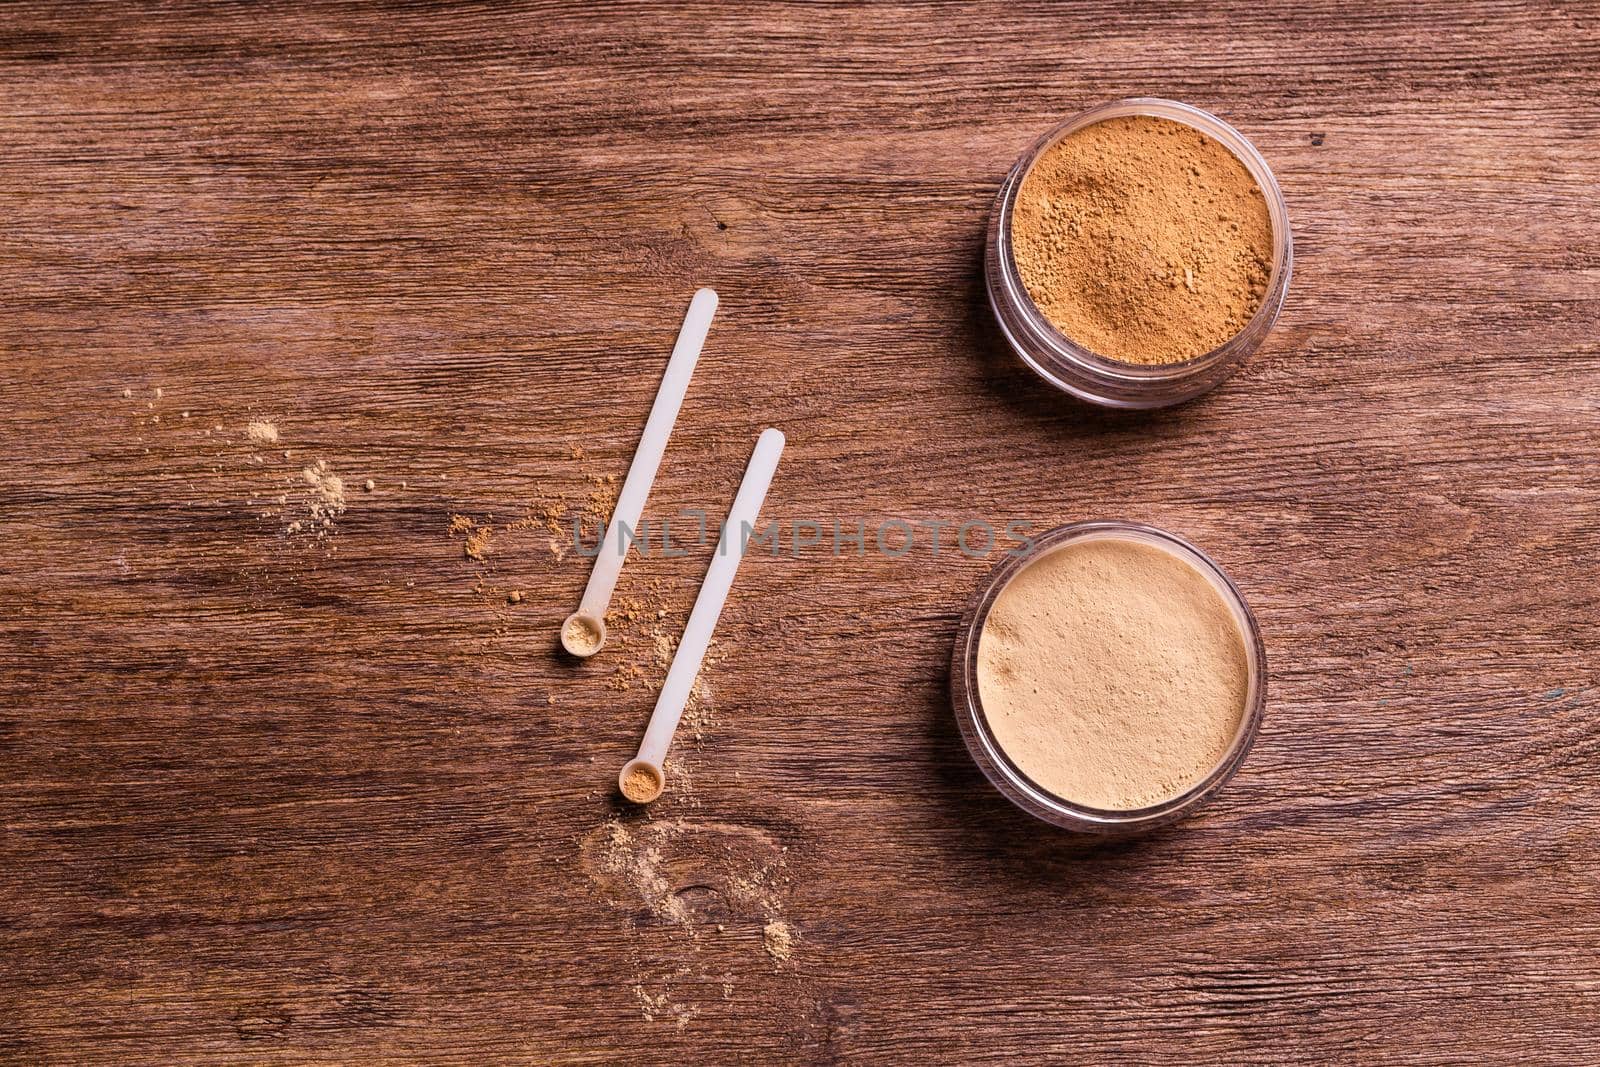 Mineral powder of different colors with a spoon dispenser for make-up on wooden background by Satura86